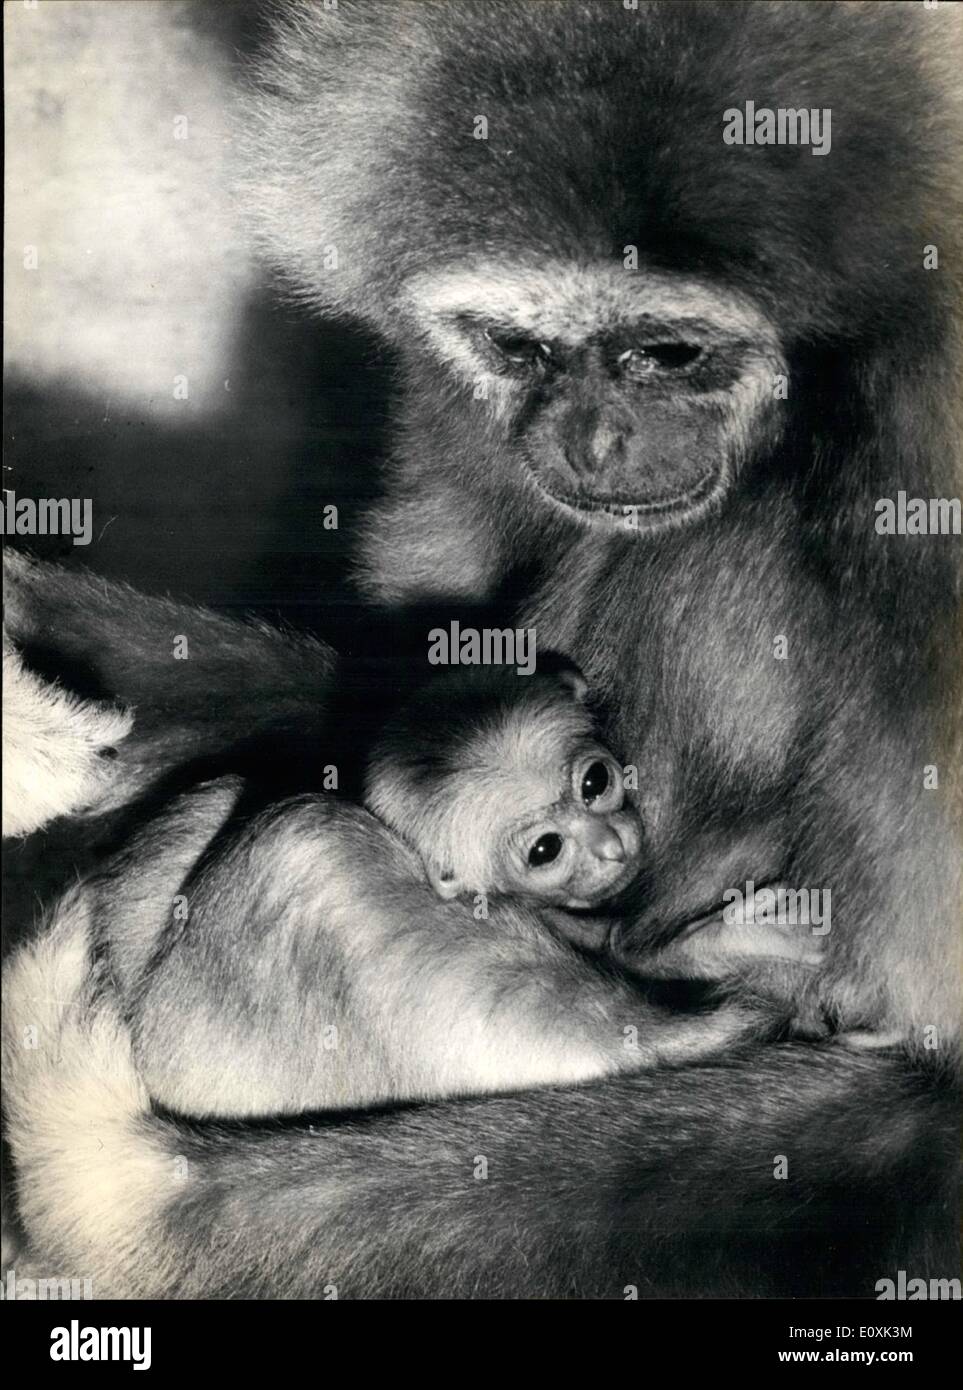 Feb. 02, 1967 - A gibbon baby at Zurich Zoo: Three days old gibbon baby at the Zurich Zoo with its mother. It is the fifth birth of a gibbon in Zurich the baby got the name ''Lima'' which means five in Malayan. Stock Photo